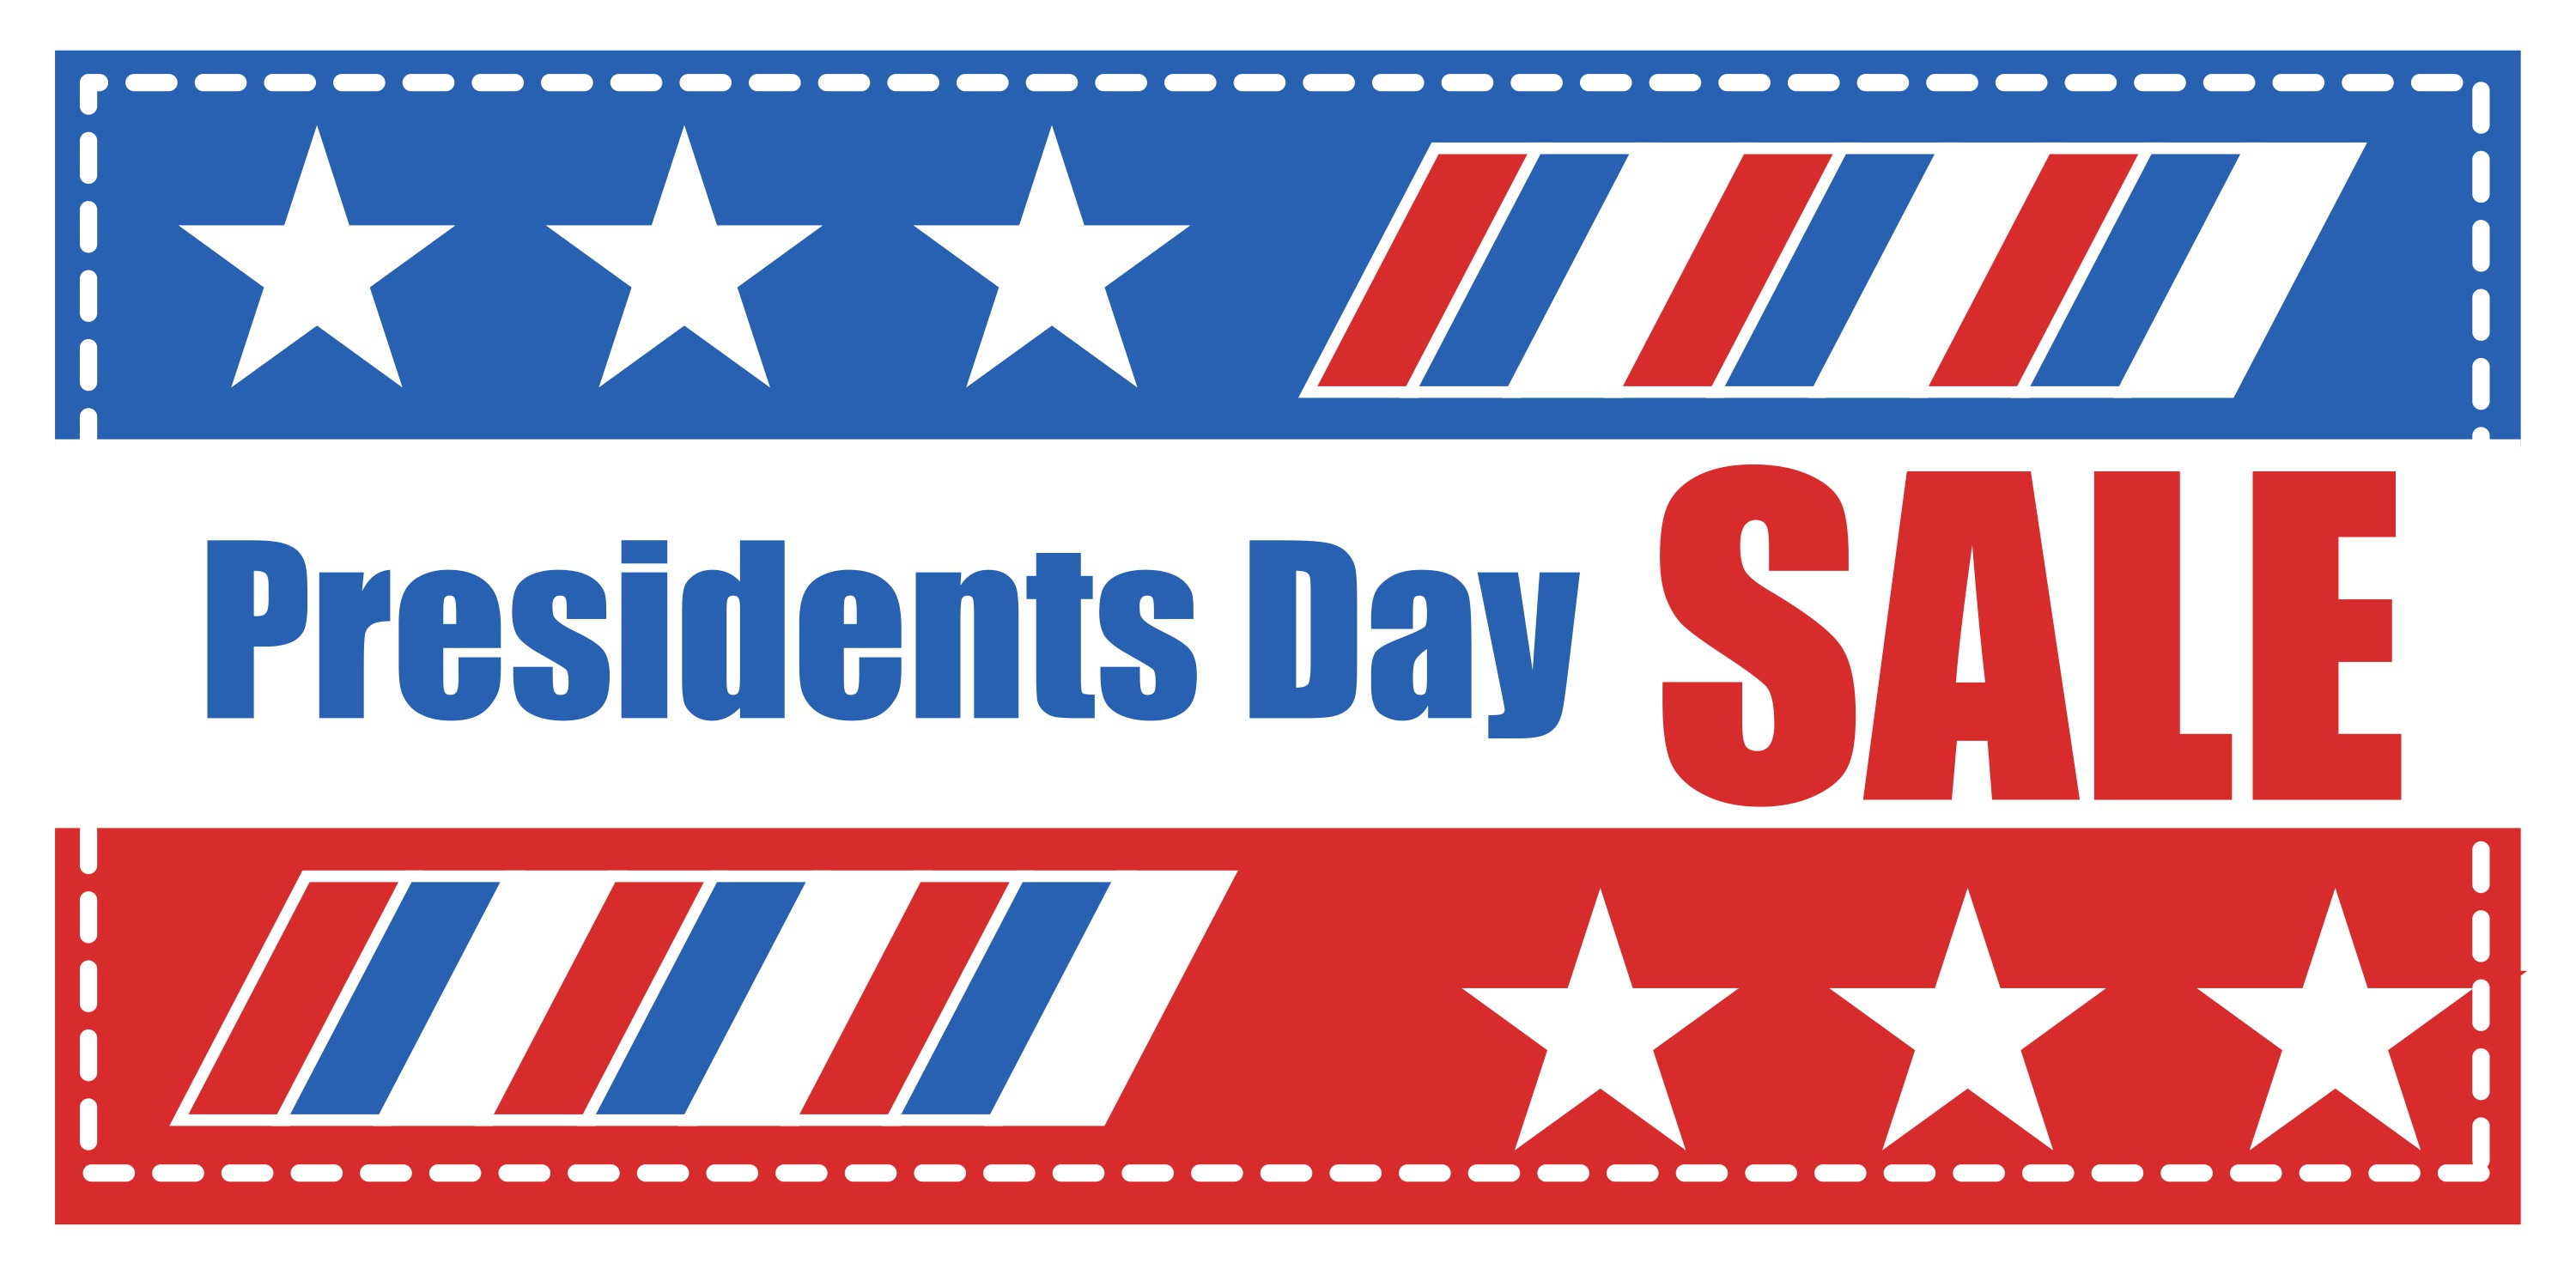 President's Day Sales and Deals Mission to Save